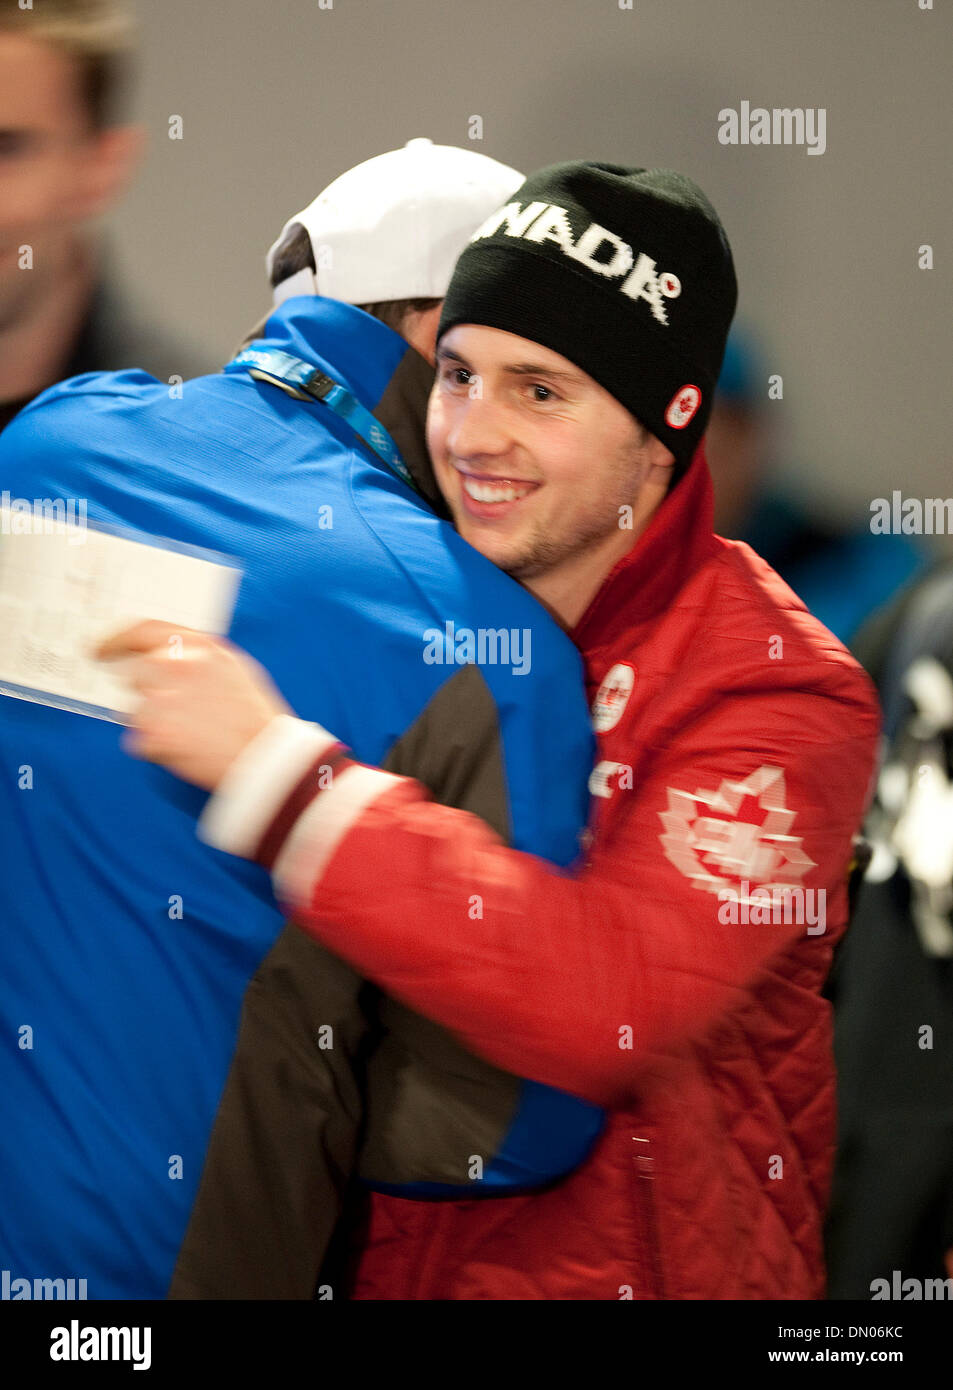 Feb 14, 2010 - Vancouver, British Columbia, Canada - Canada's ALEXANDRE BILODEAU won the men's moguls freestyle skiing title on Sunday, claiming the host nation's first gold medal of the Games and ending a long-running jinx. Bilodeau scored 26.75 points. Bilodeau won the men's moguls freestyle skiing title on Sunday, claiming the host nation's first gold medal of the Games and endi Stock Photo